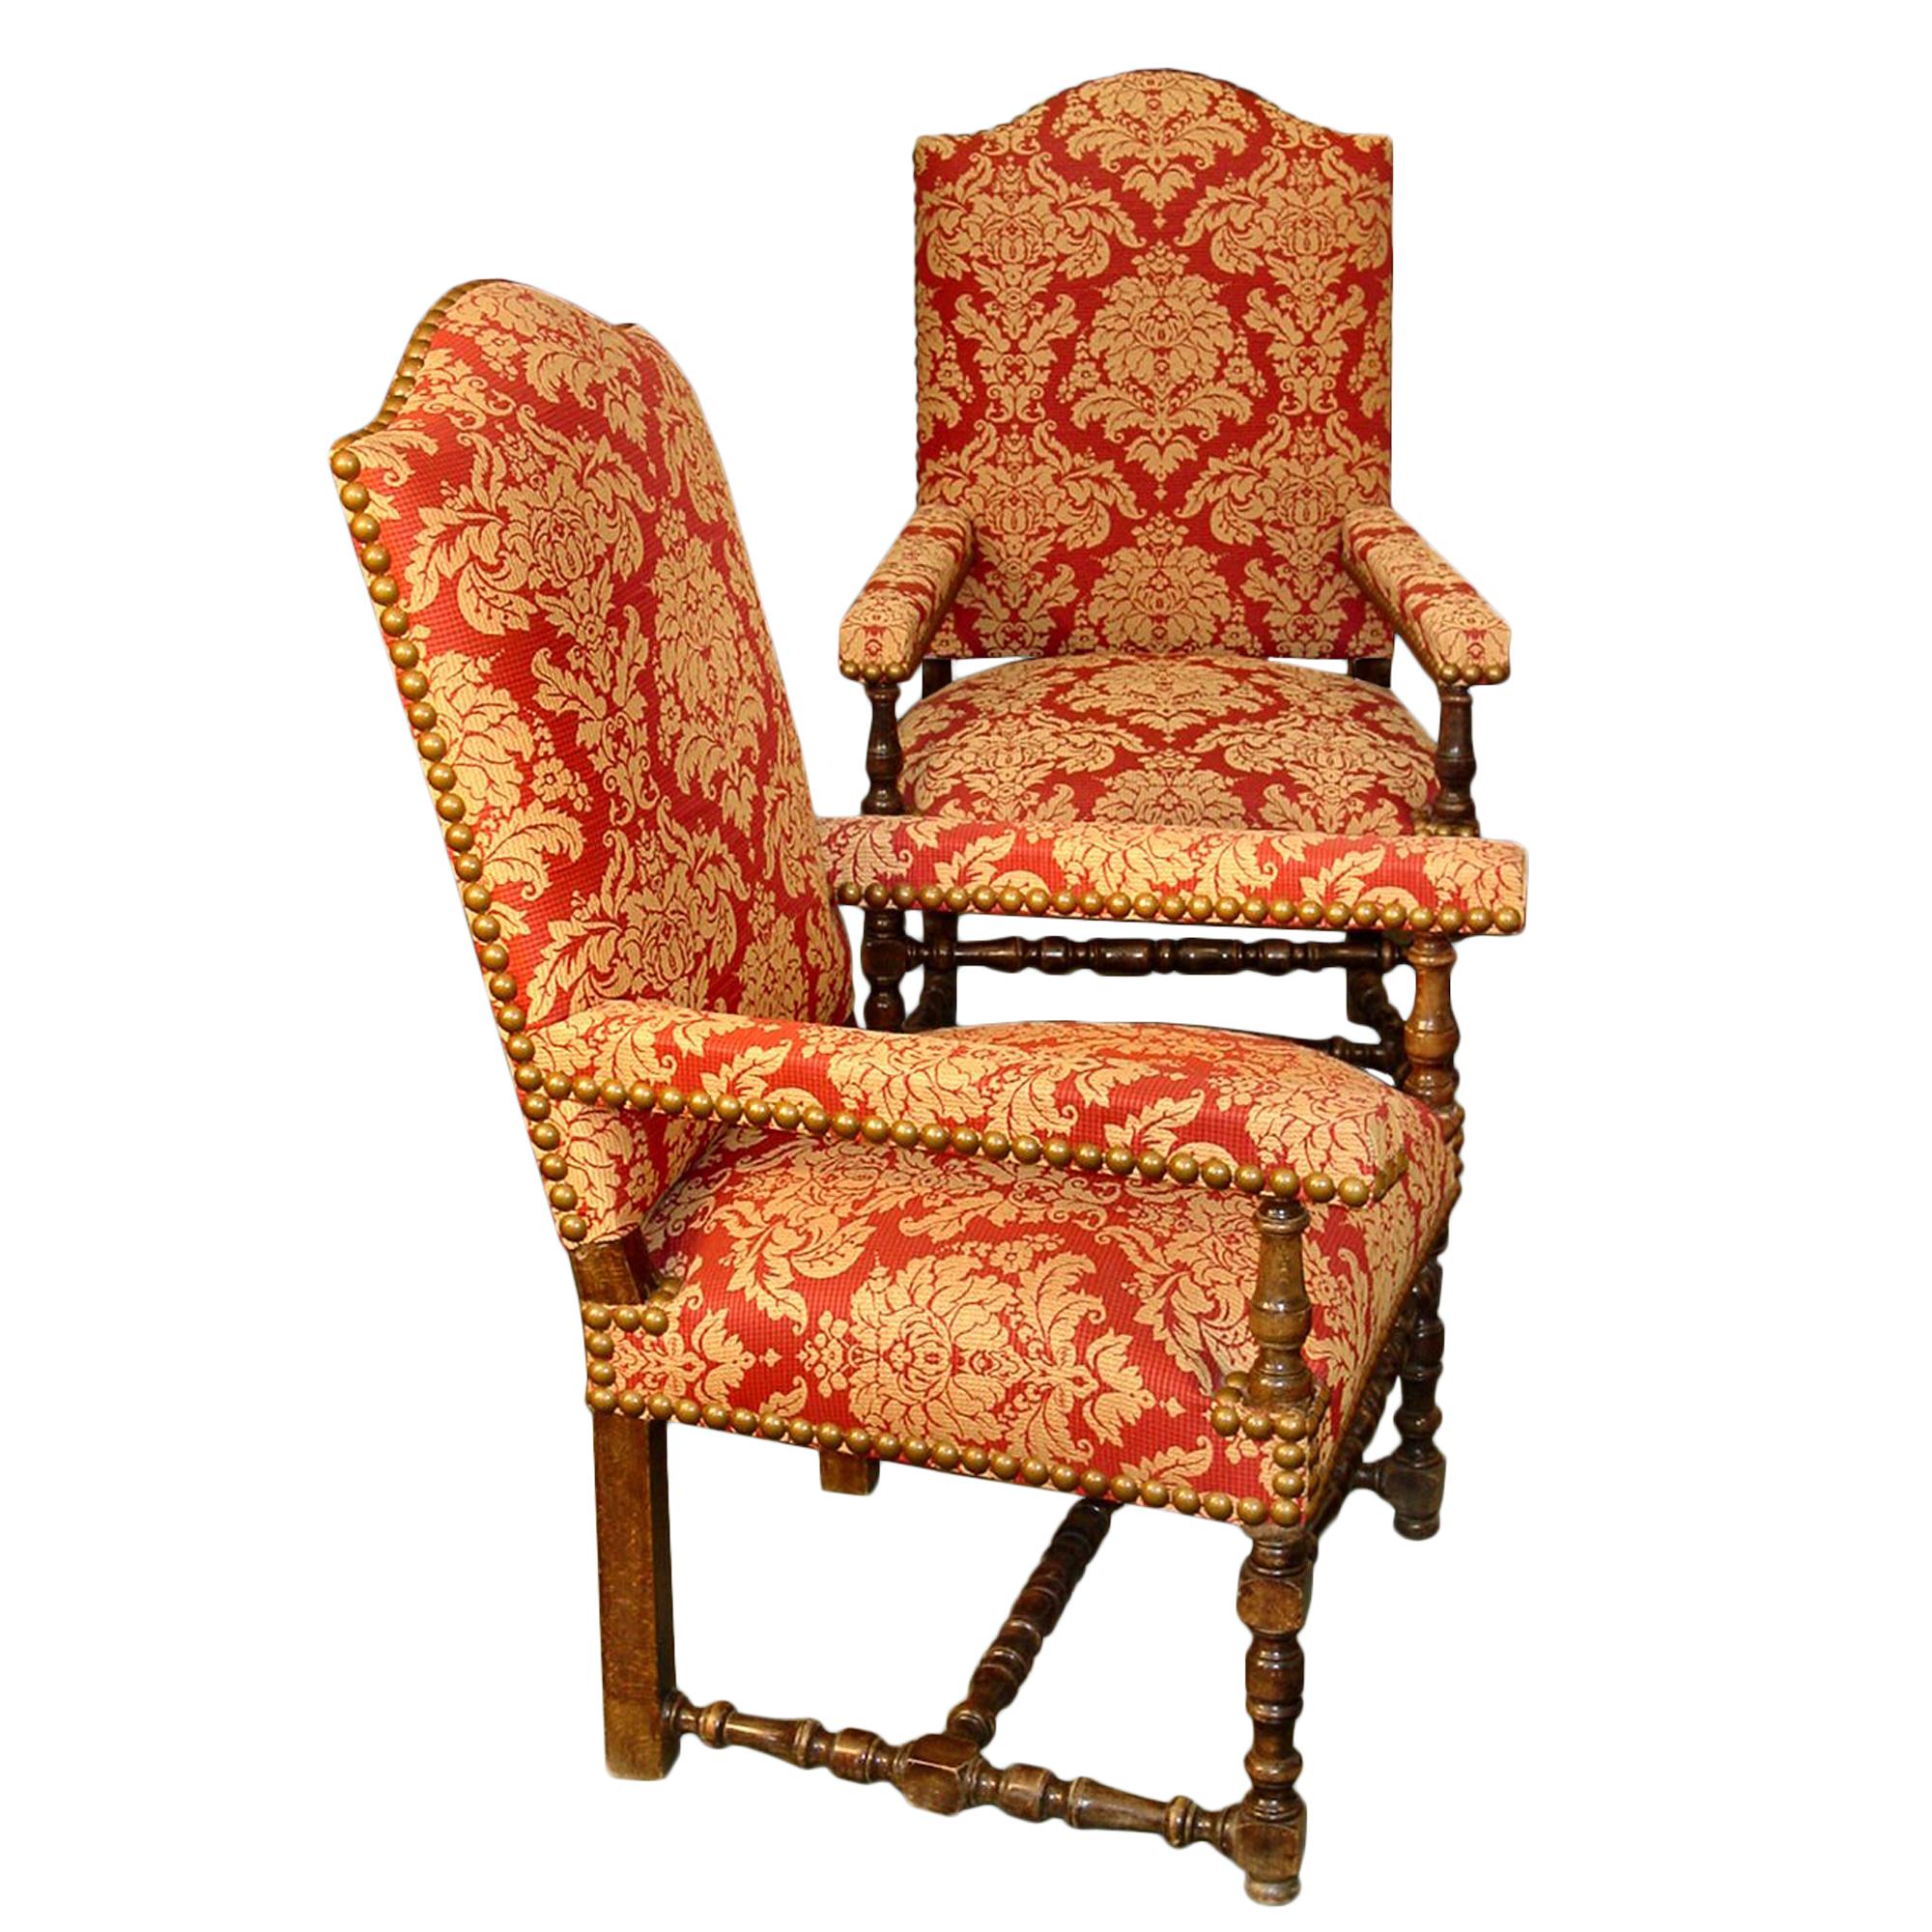 A handsome pair of French Louis XIII st. turn of the century walnut armchairs. Raised on walnut turned legs with a turned stretcher at the front and bottom. Turned baluster supports raise the straight upholstered arms below the high, curved top